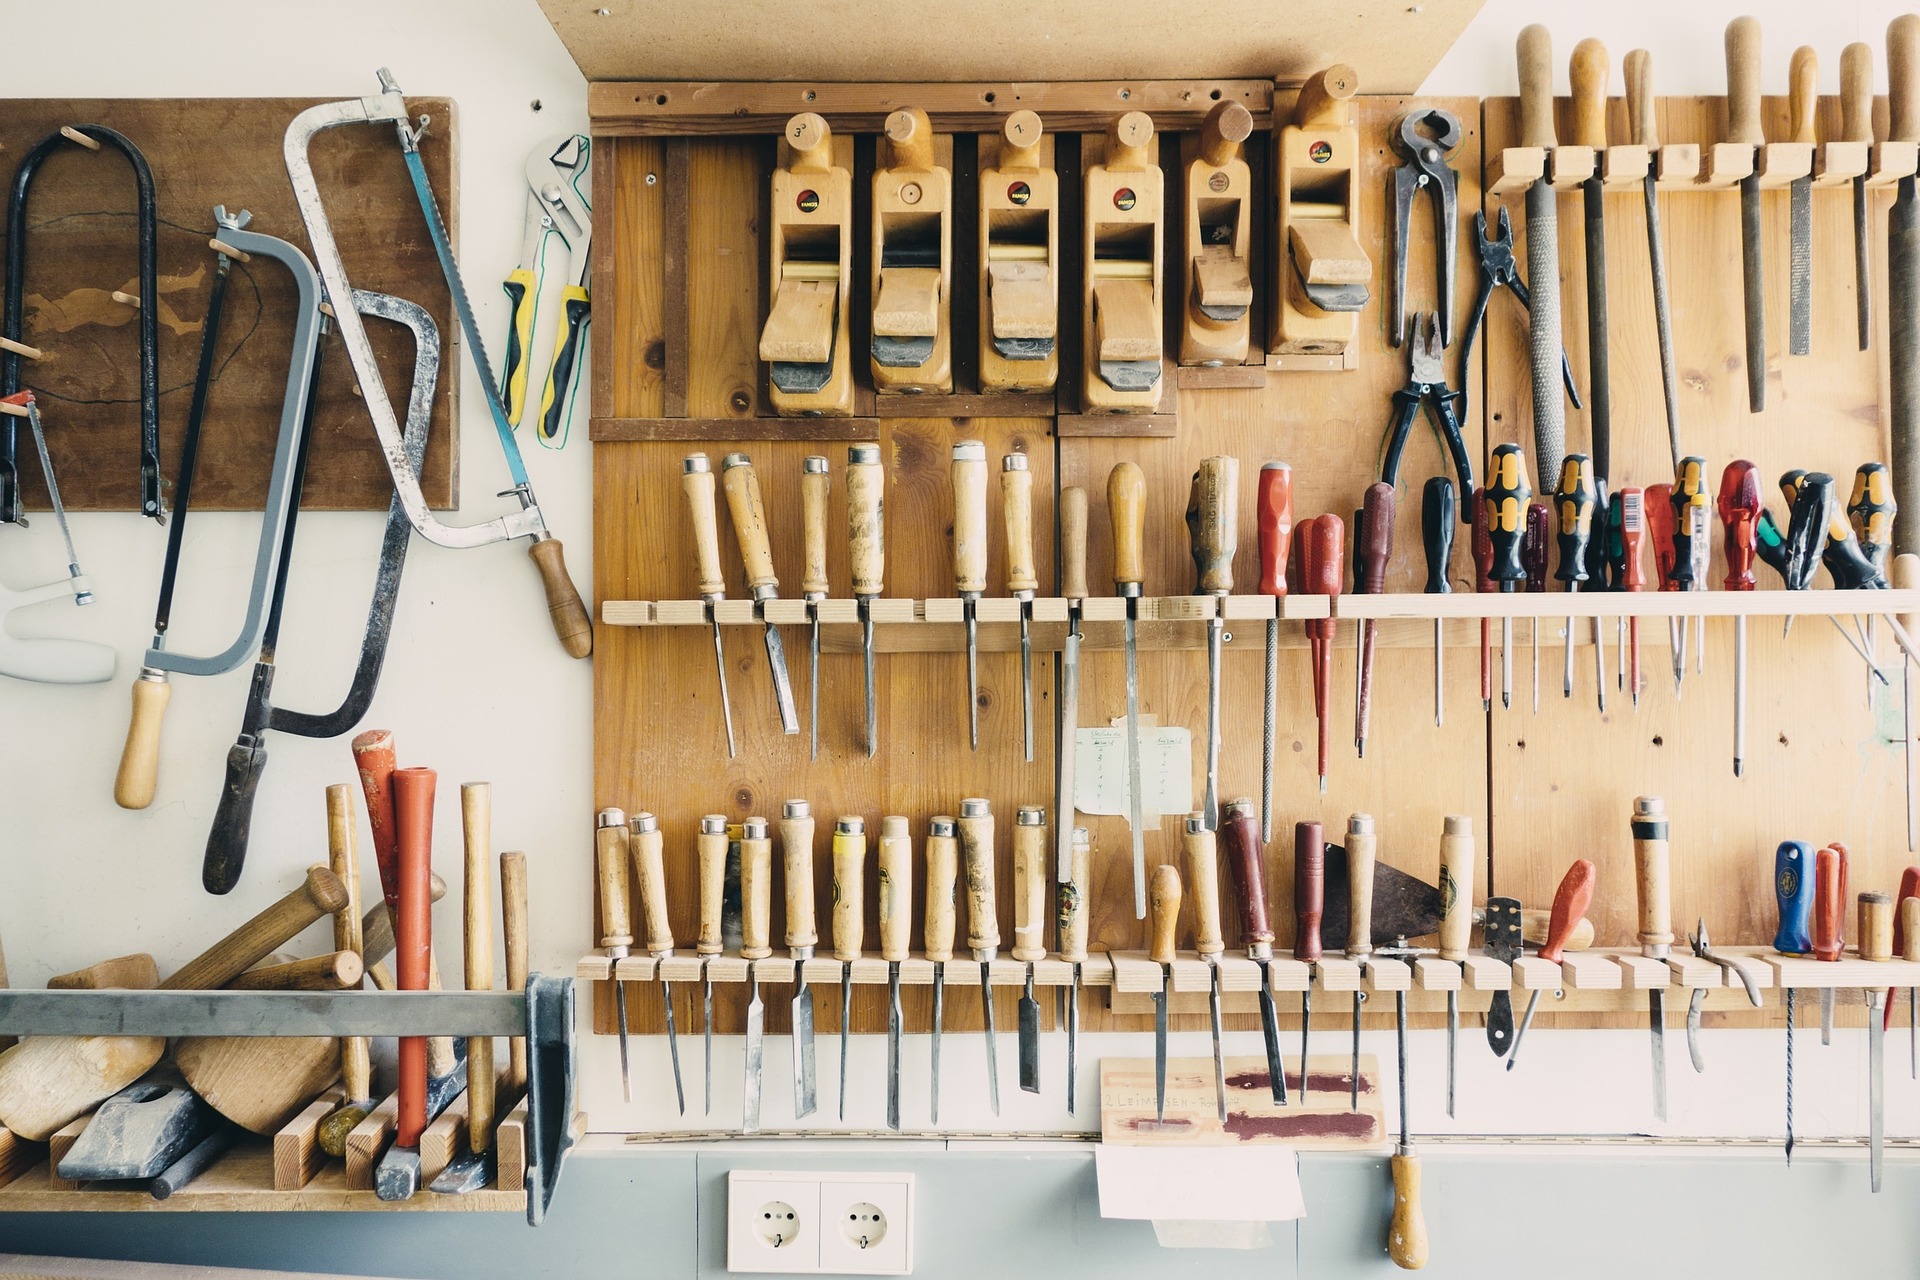 Project Roundup: Spring Ahead and Organize Your Garage